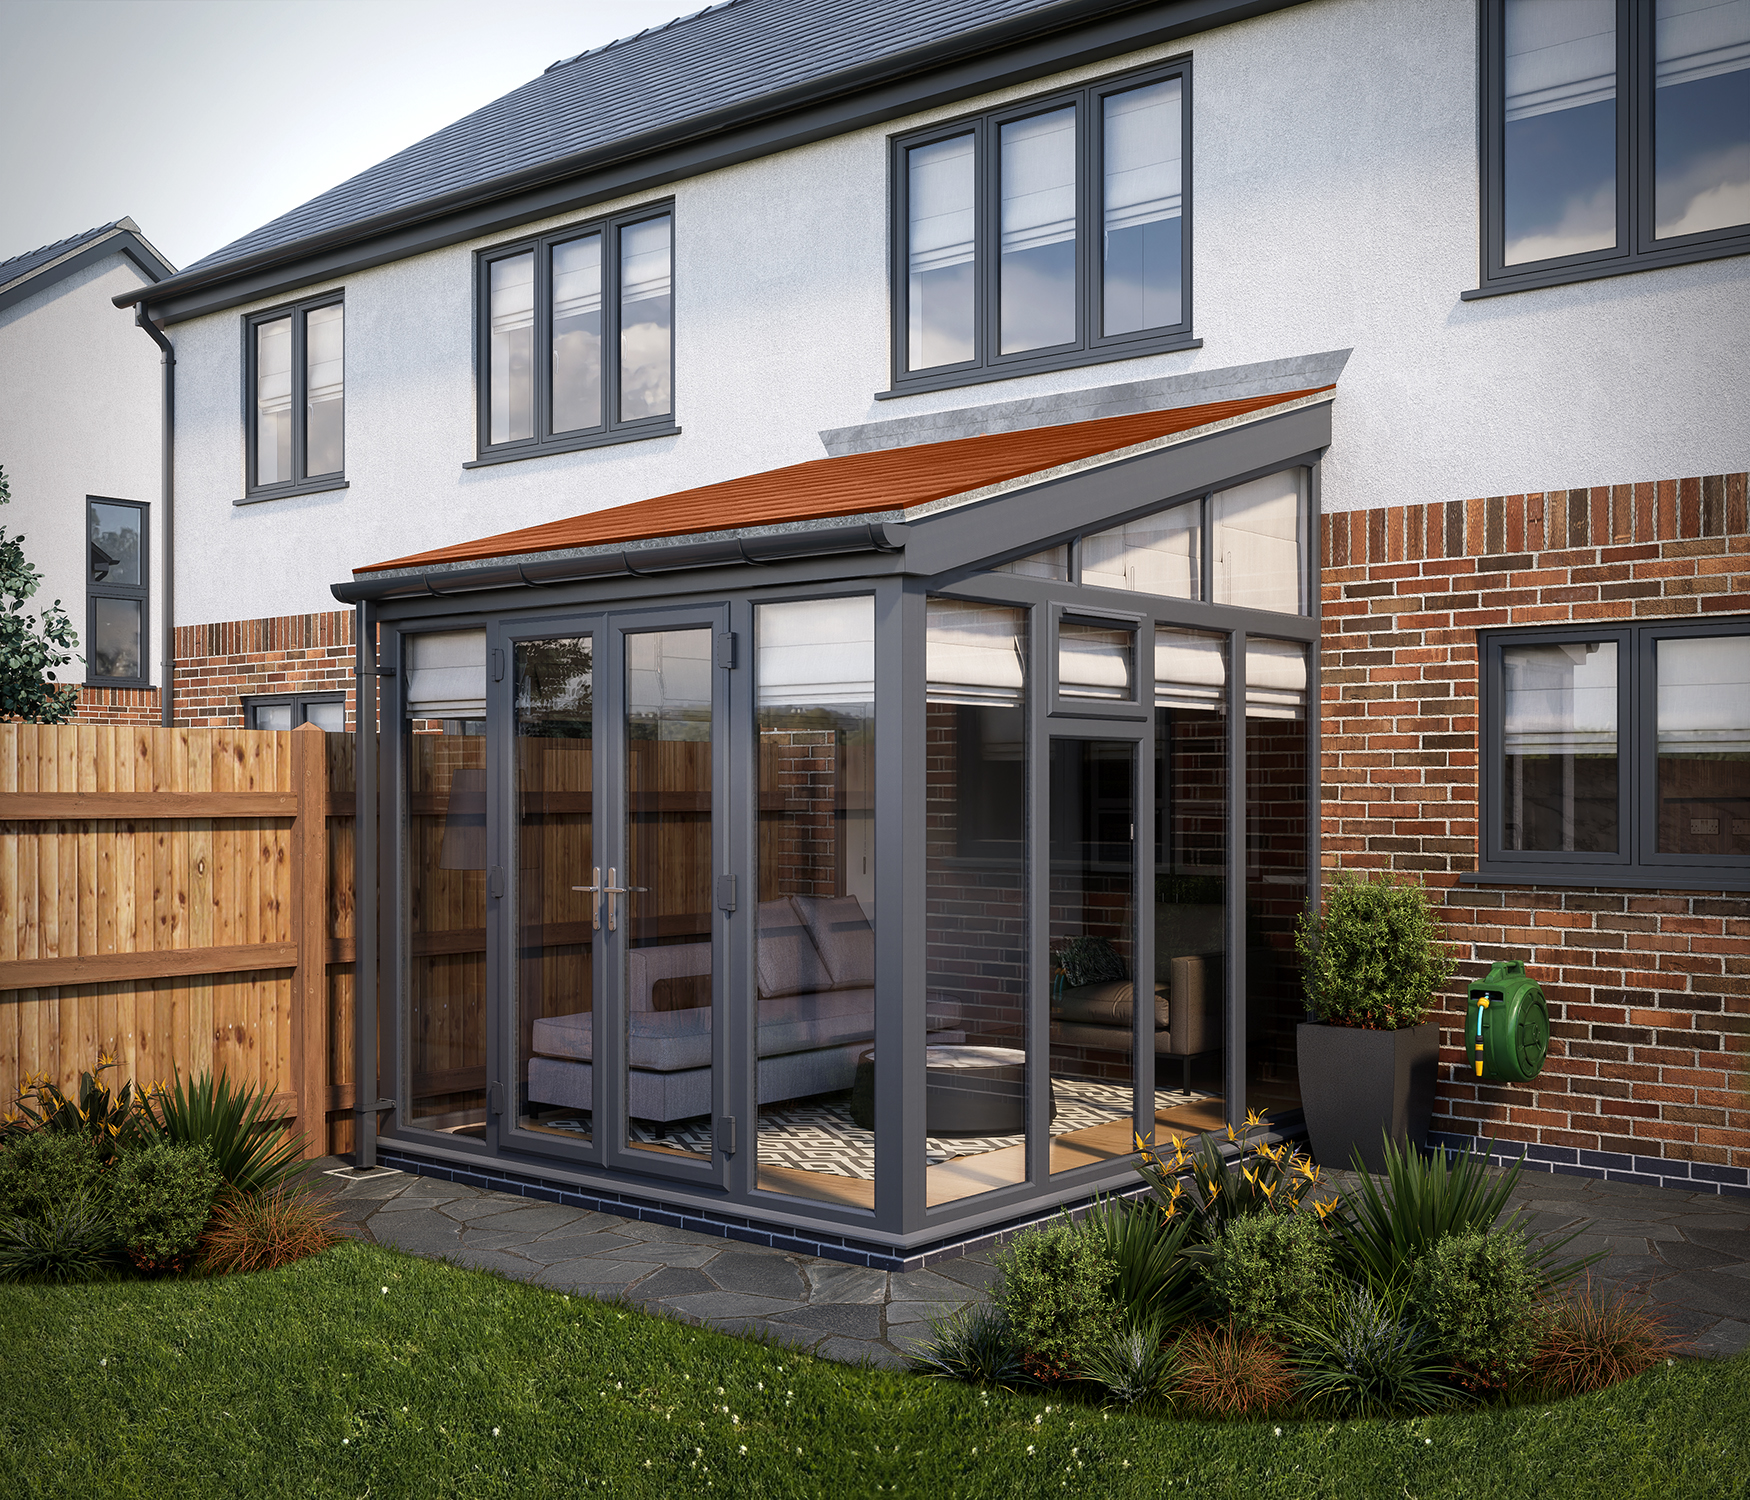 Image of SOLid Roof Full Height Lean to Conservatory Grey Frames with Rustic Terracotta Tiles - 10 x 10ft